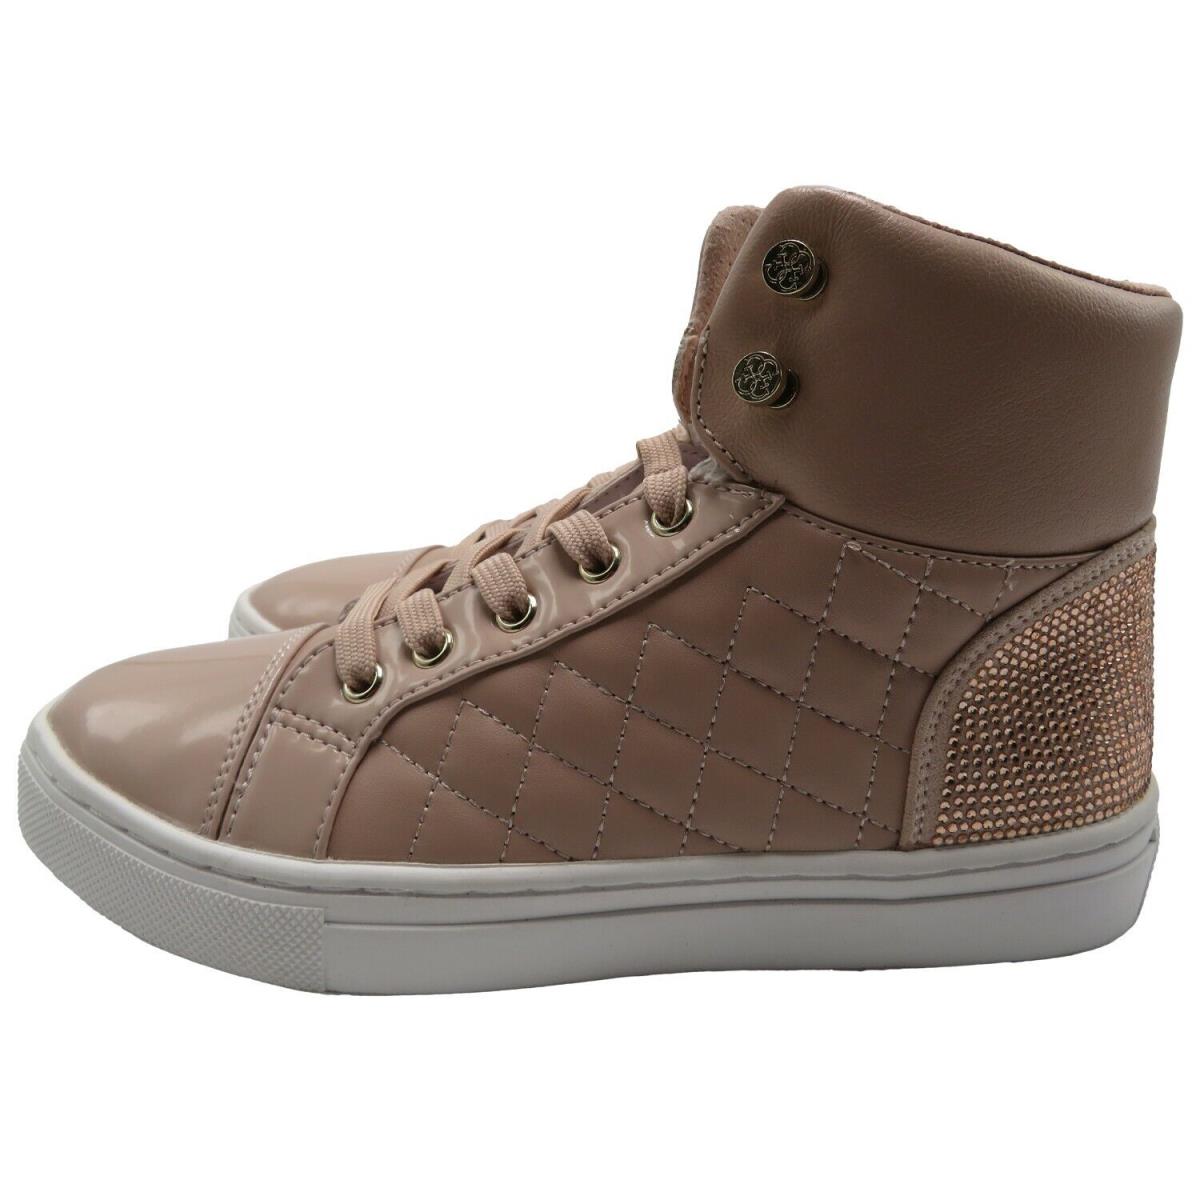 Guess Women`s Janis Quilted High Top Sneakers Size: 6